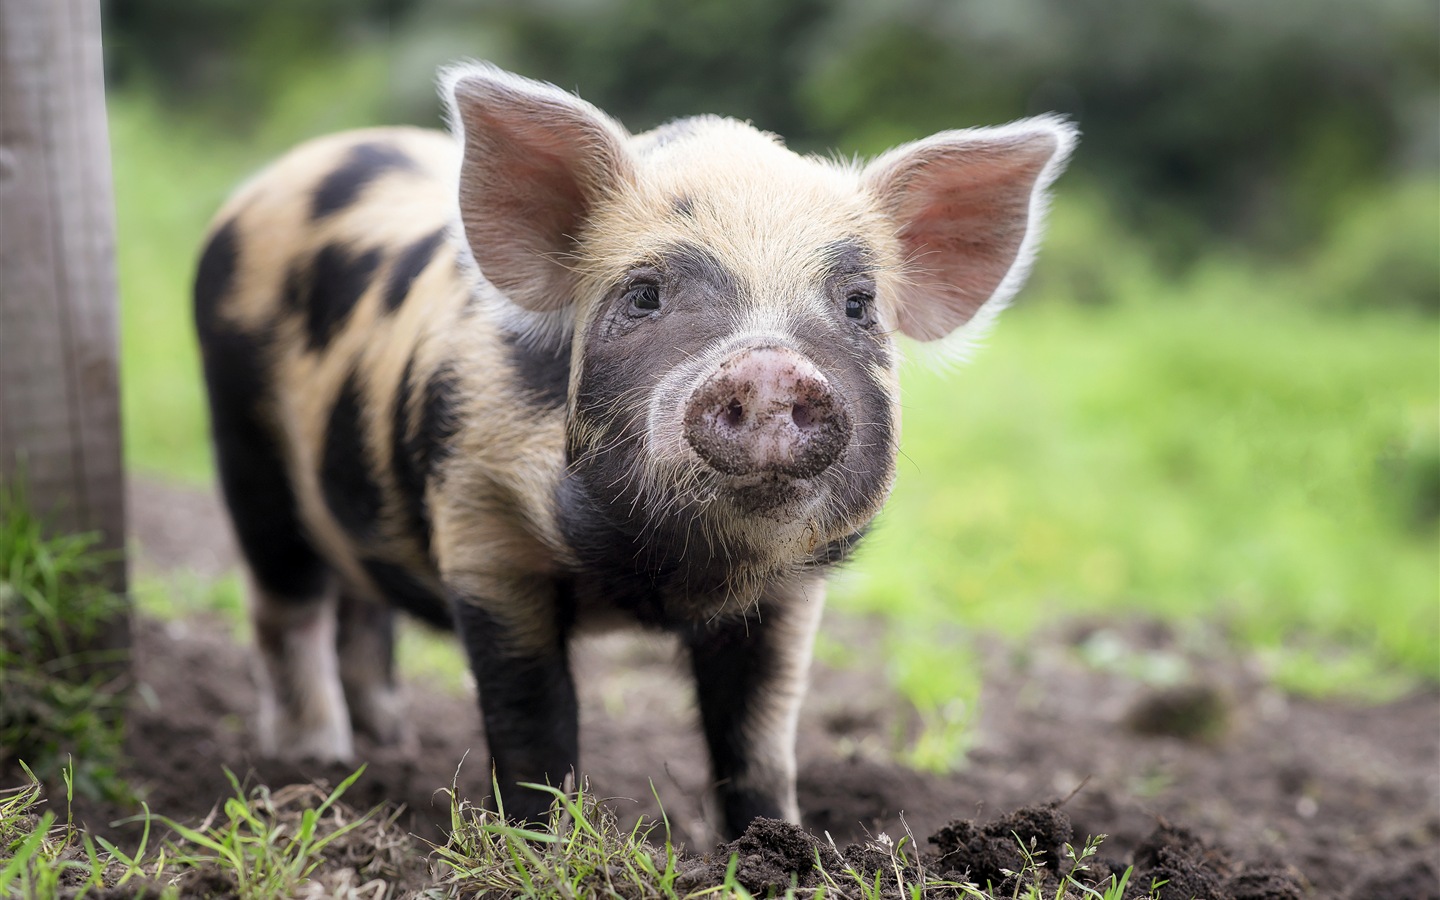 Pig Year about pigs HD wallpapers #8 - 1440x900